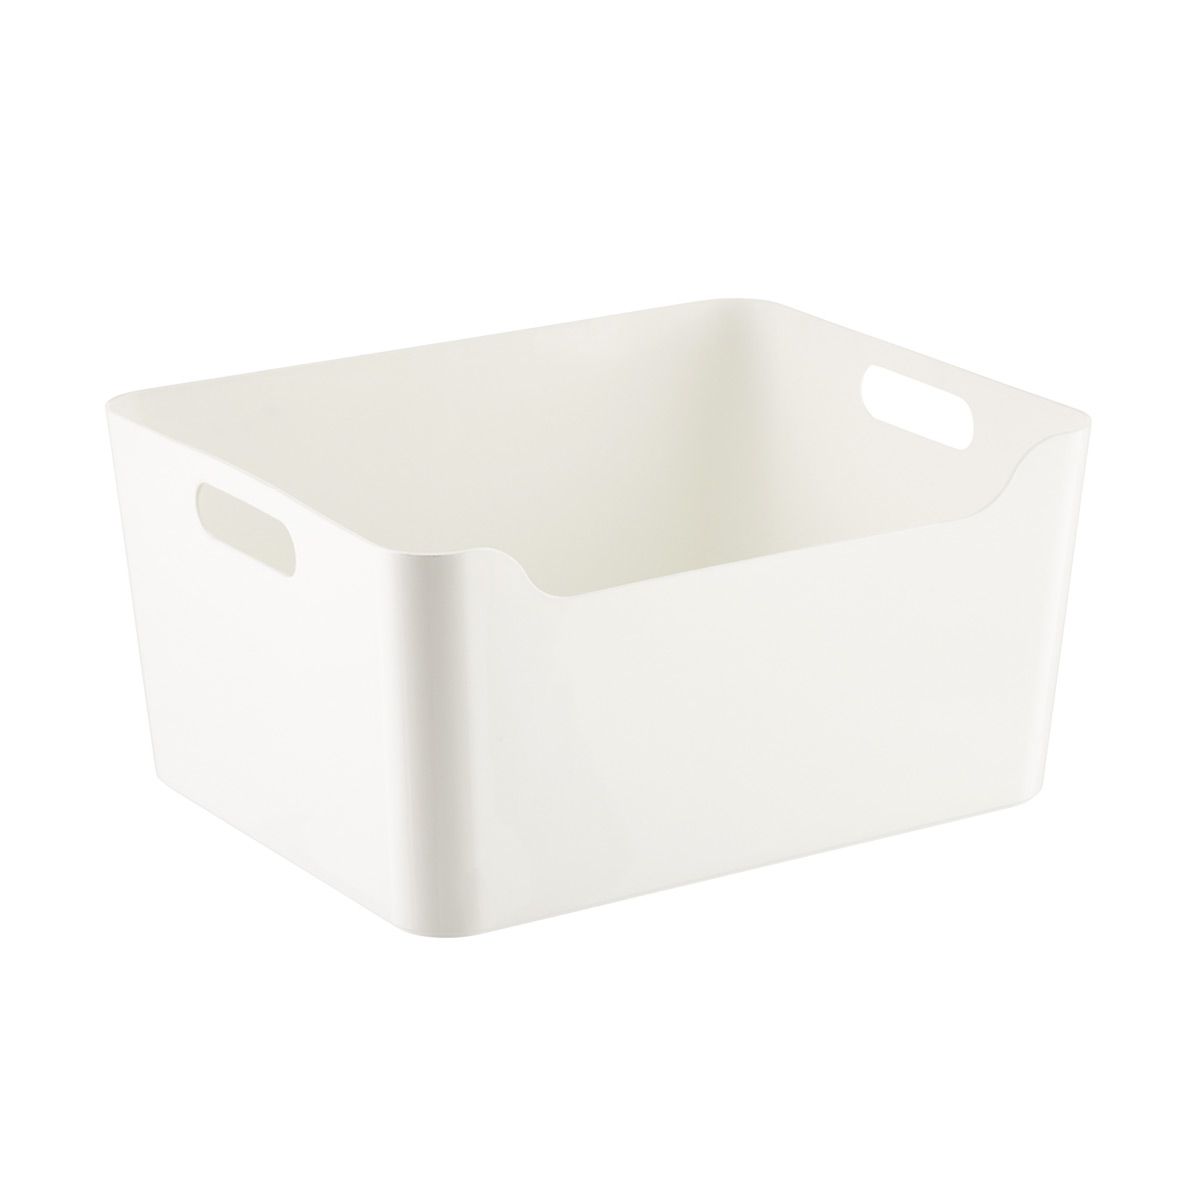 Large Plastic Storage Bin w/ Handles WhiteSKU:100712964.993 Reviews | The Container Store